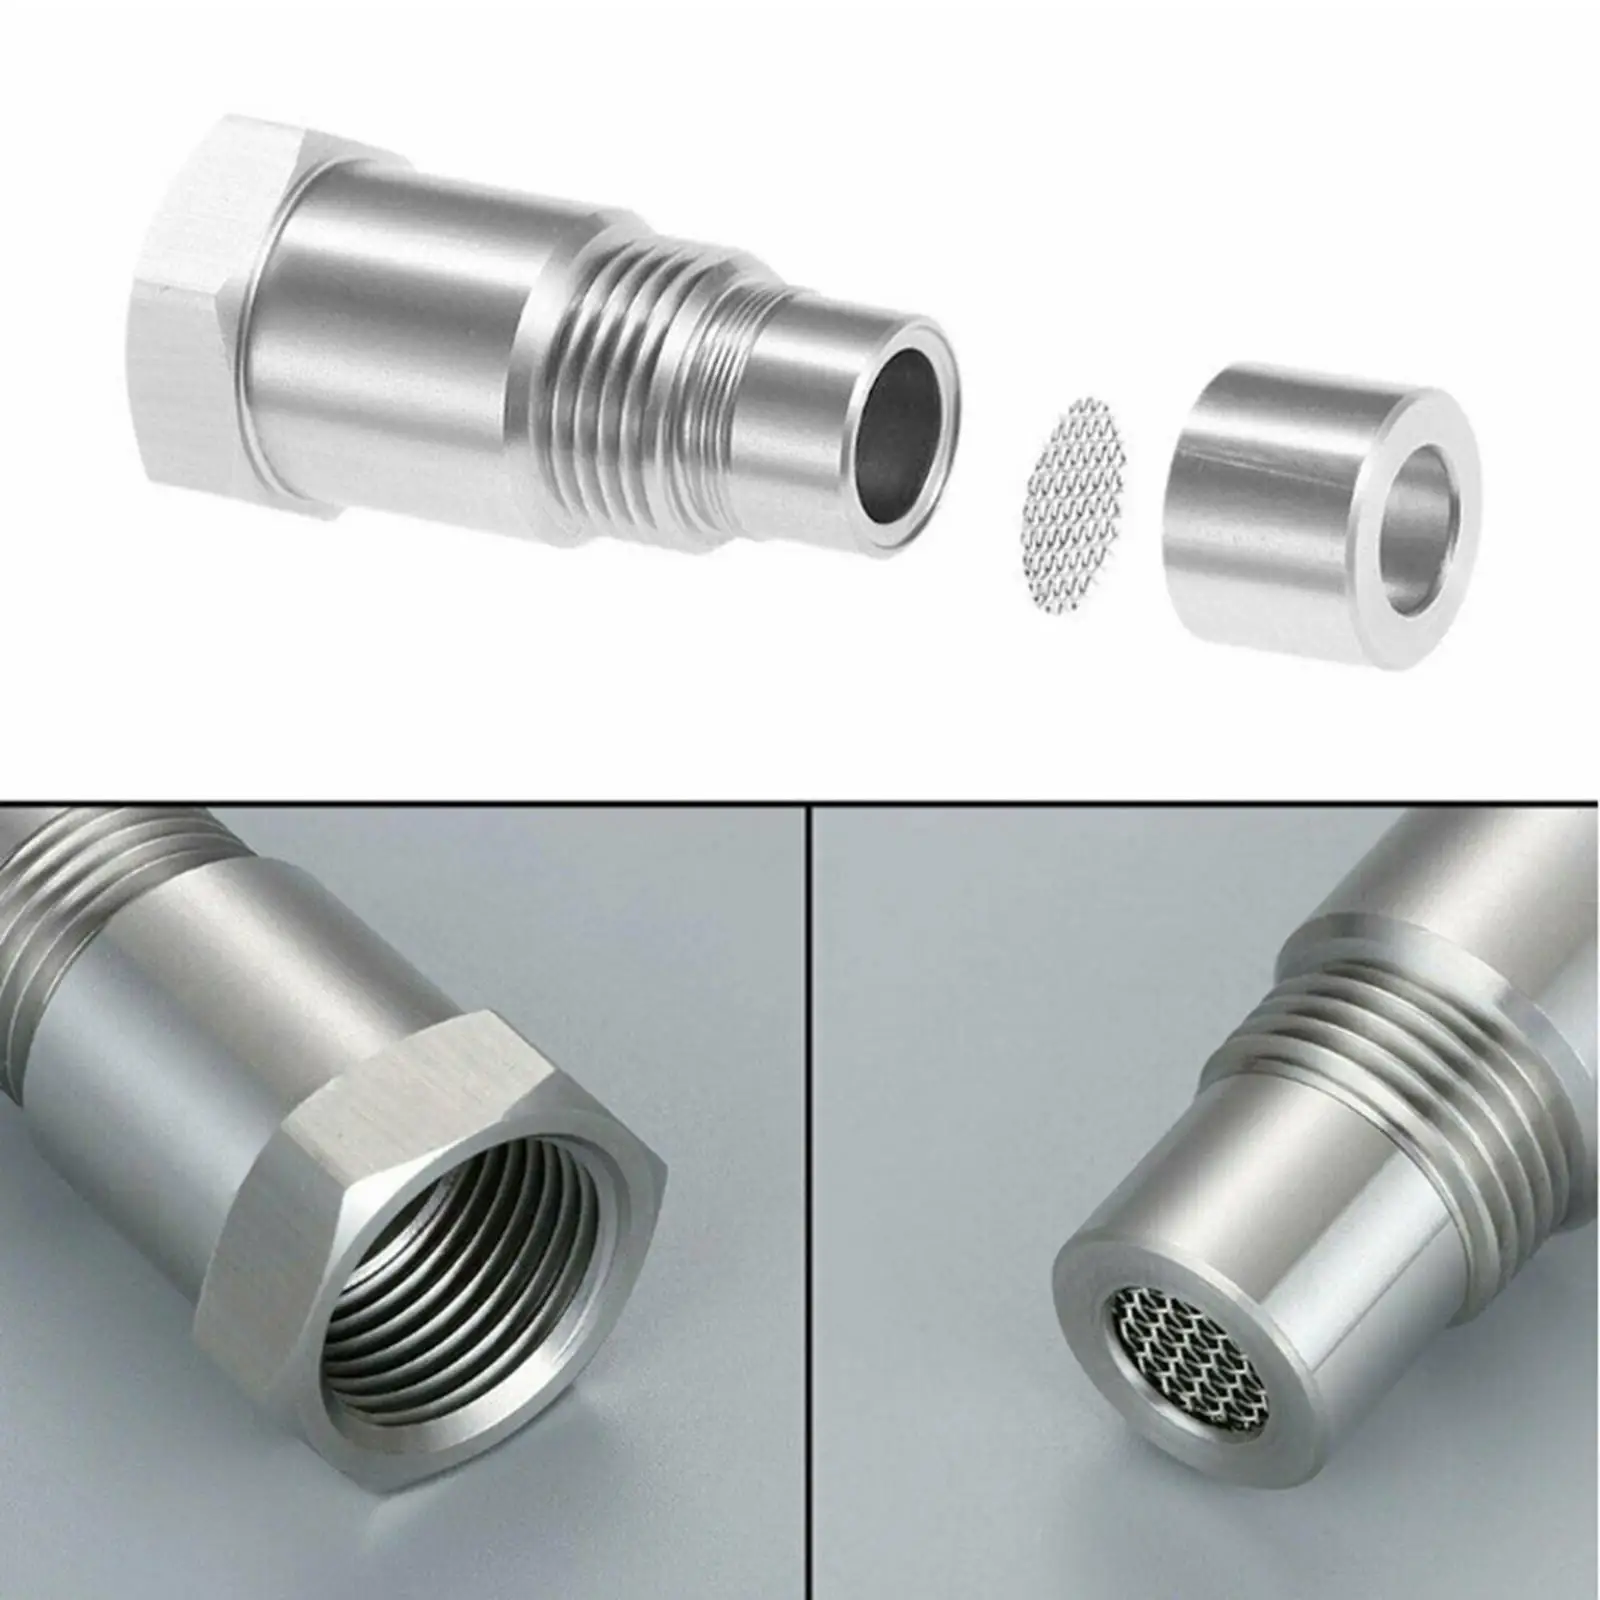 O2 Sensor Adapter Spacer Extender Stainless Steel M18x1.5 Accessory Length 46.5mm